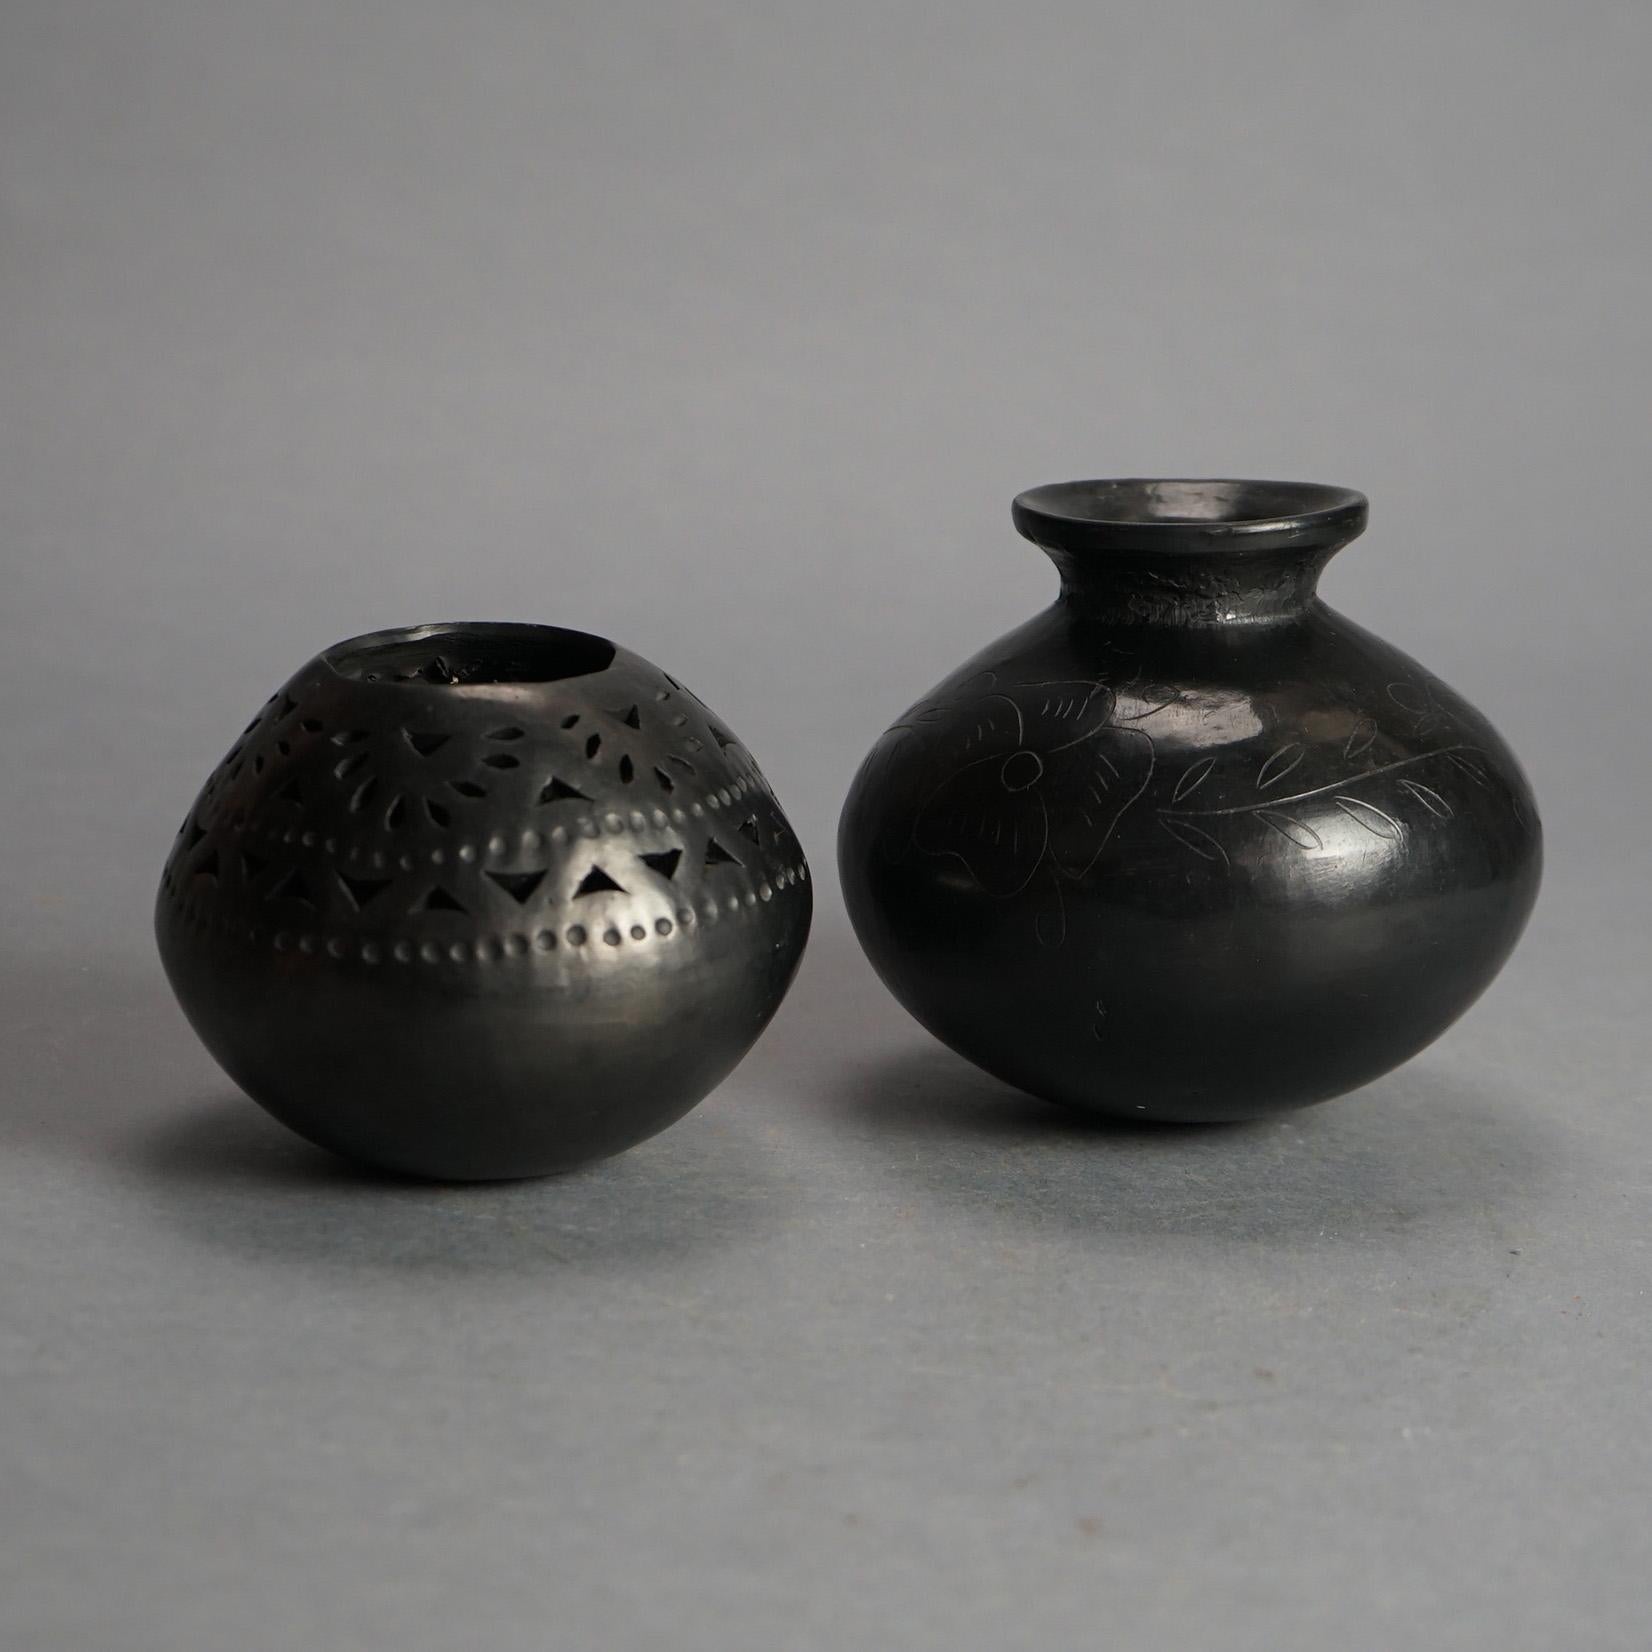 Two Antique Mexican Folk Art Black Reticulated & Incised Pottery Vases c1920

Measures - 4.75